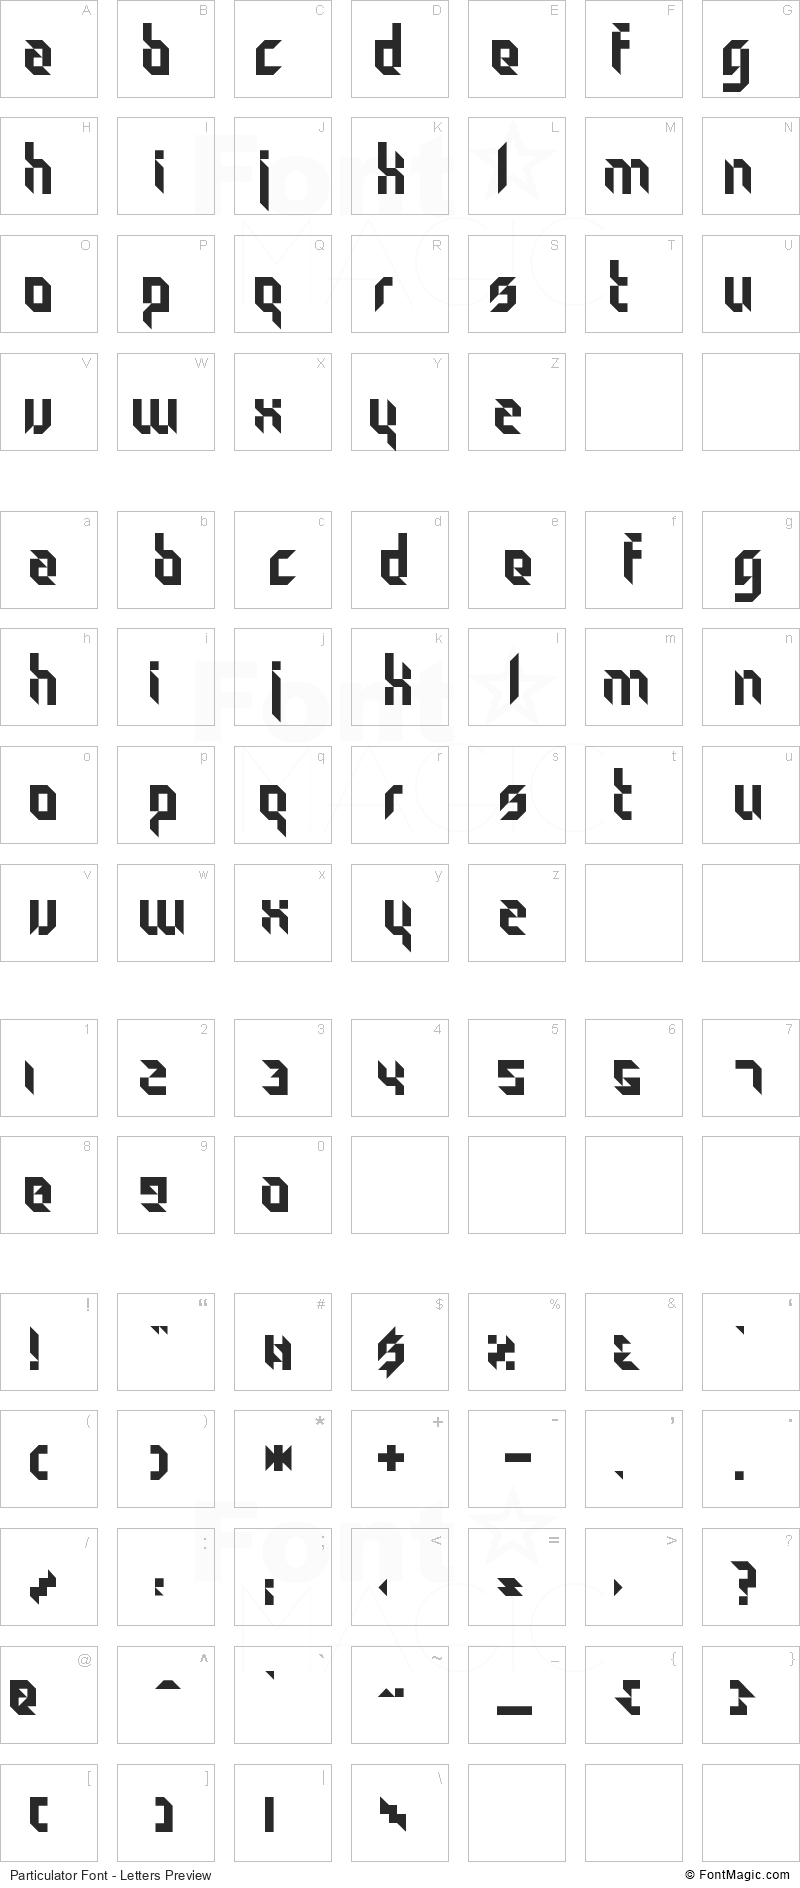 Particulator Font - All Latters Preview Chart